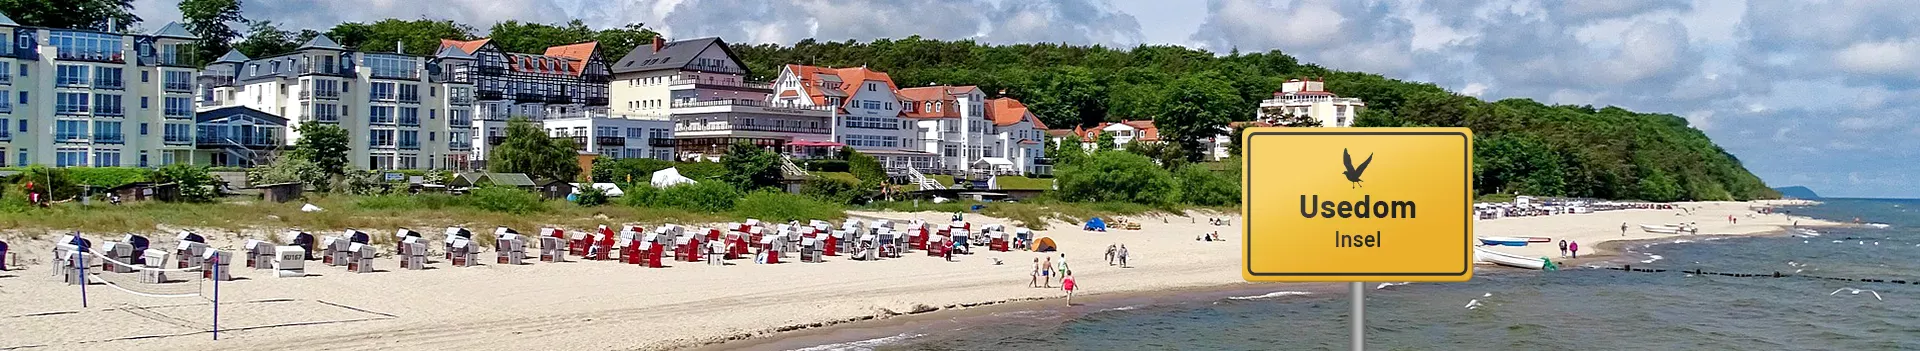 Pensionen - Ahlbeck auf Usedom - Pension Seeperle